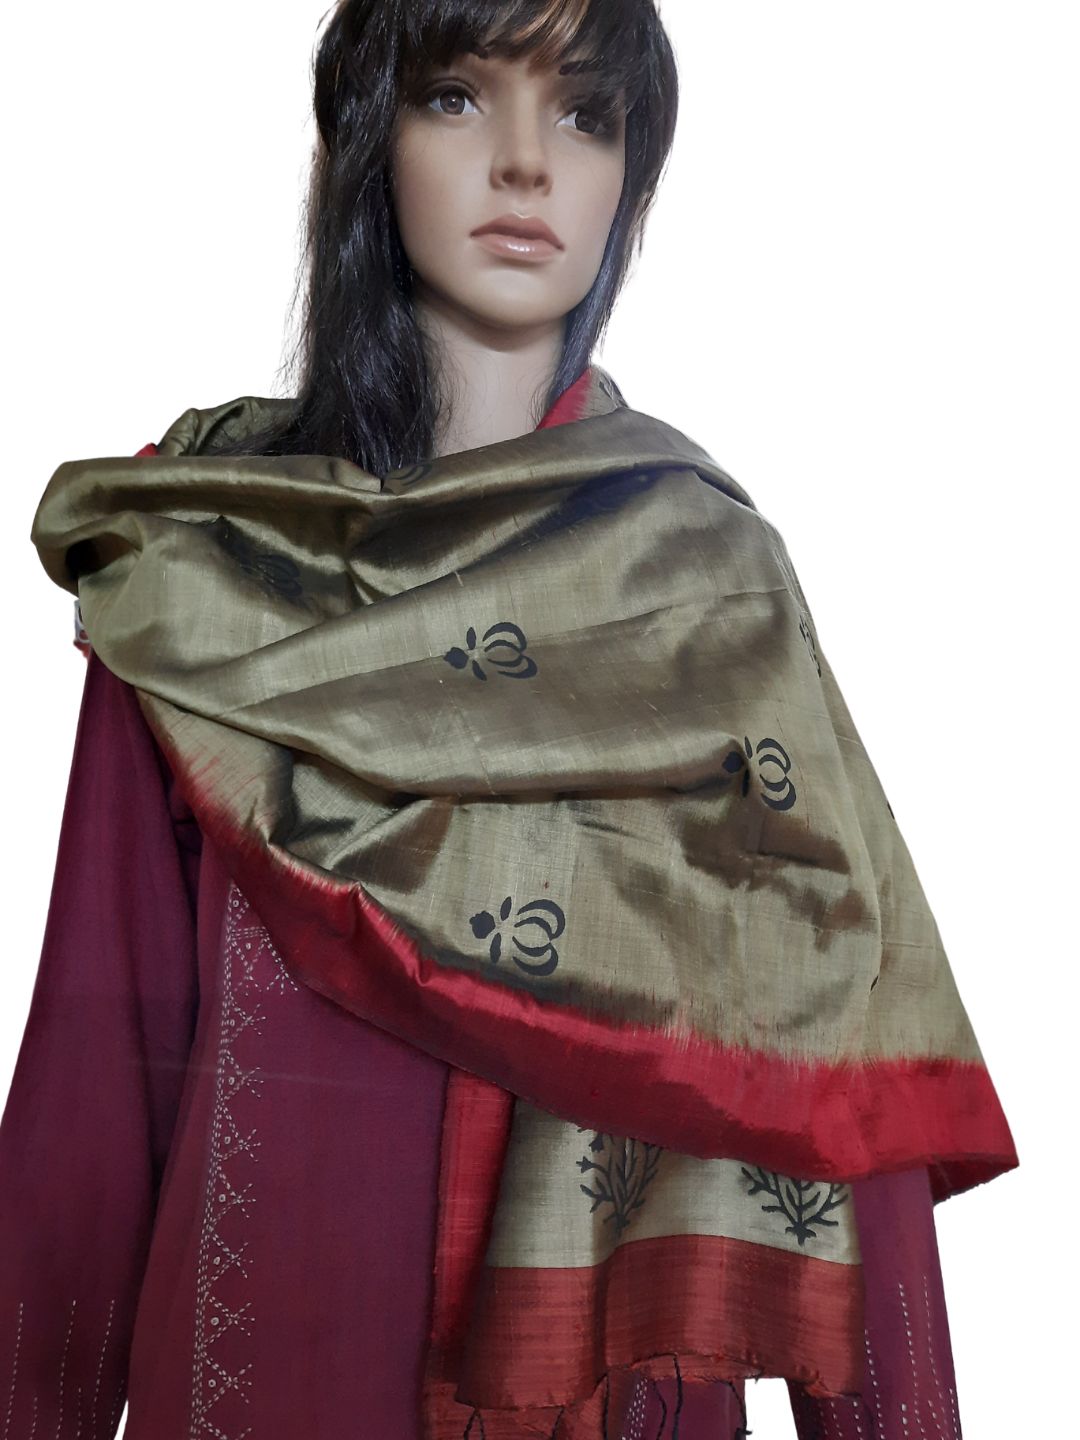 Grey with Maroon mulberry silk stole with hand blocked motifs